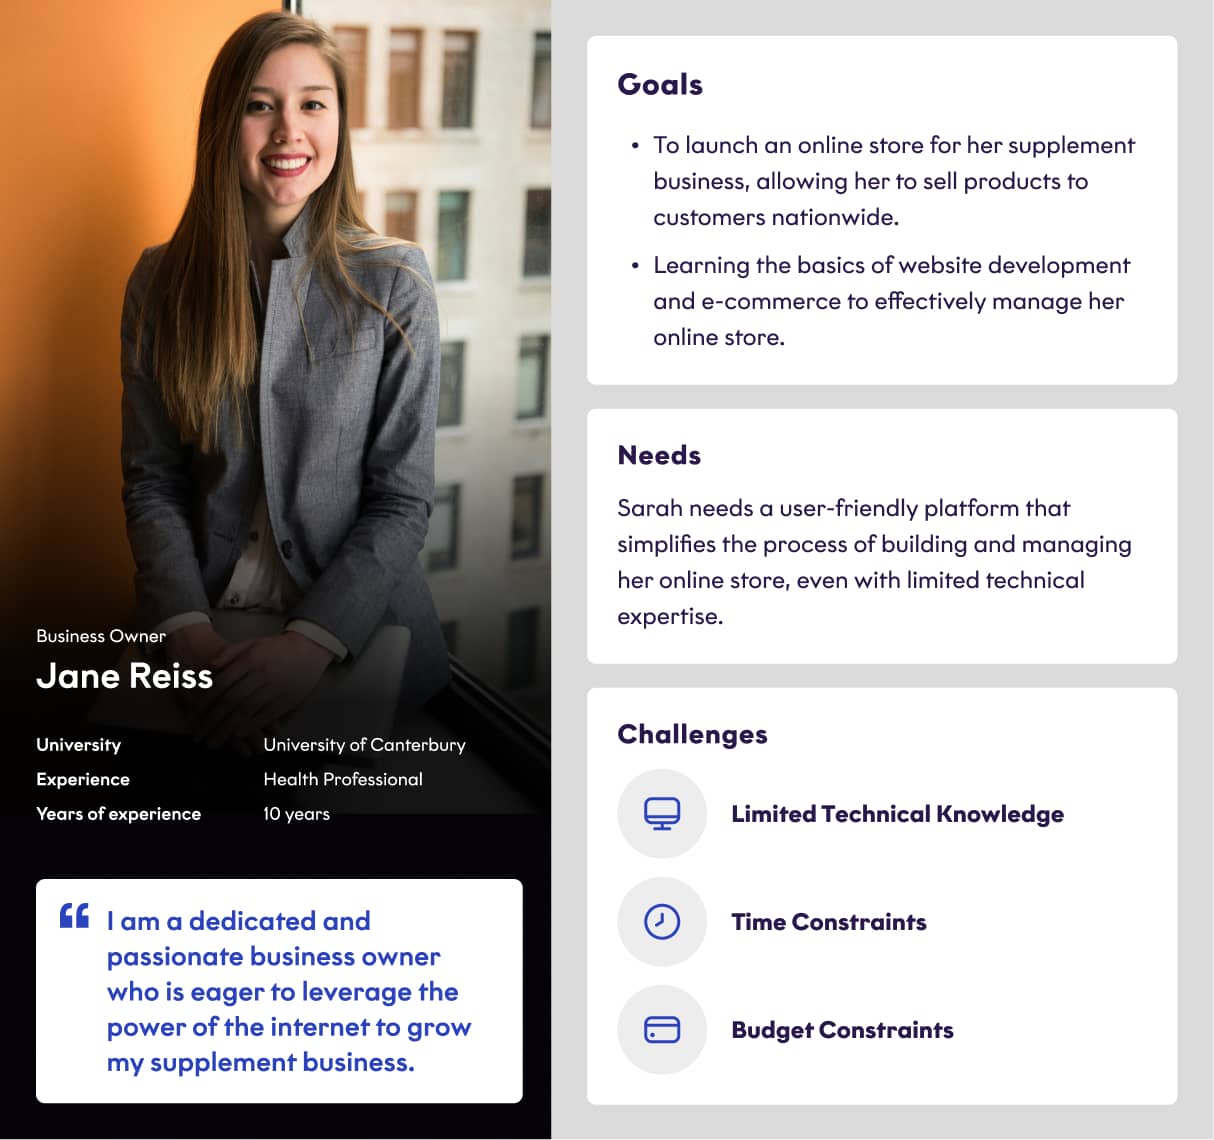 Business owner Jane persona for the online store